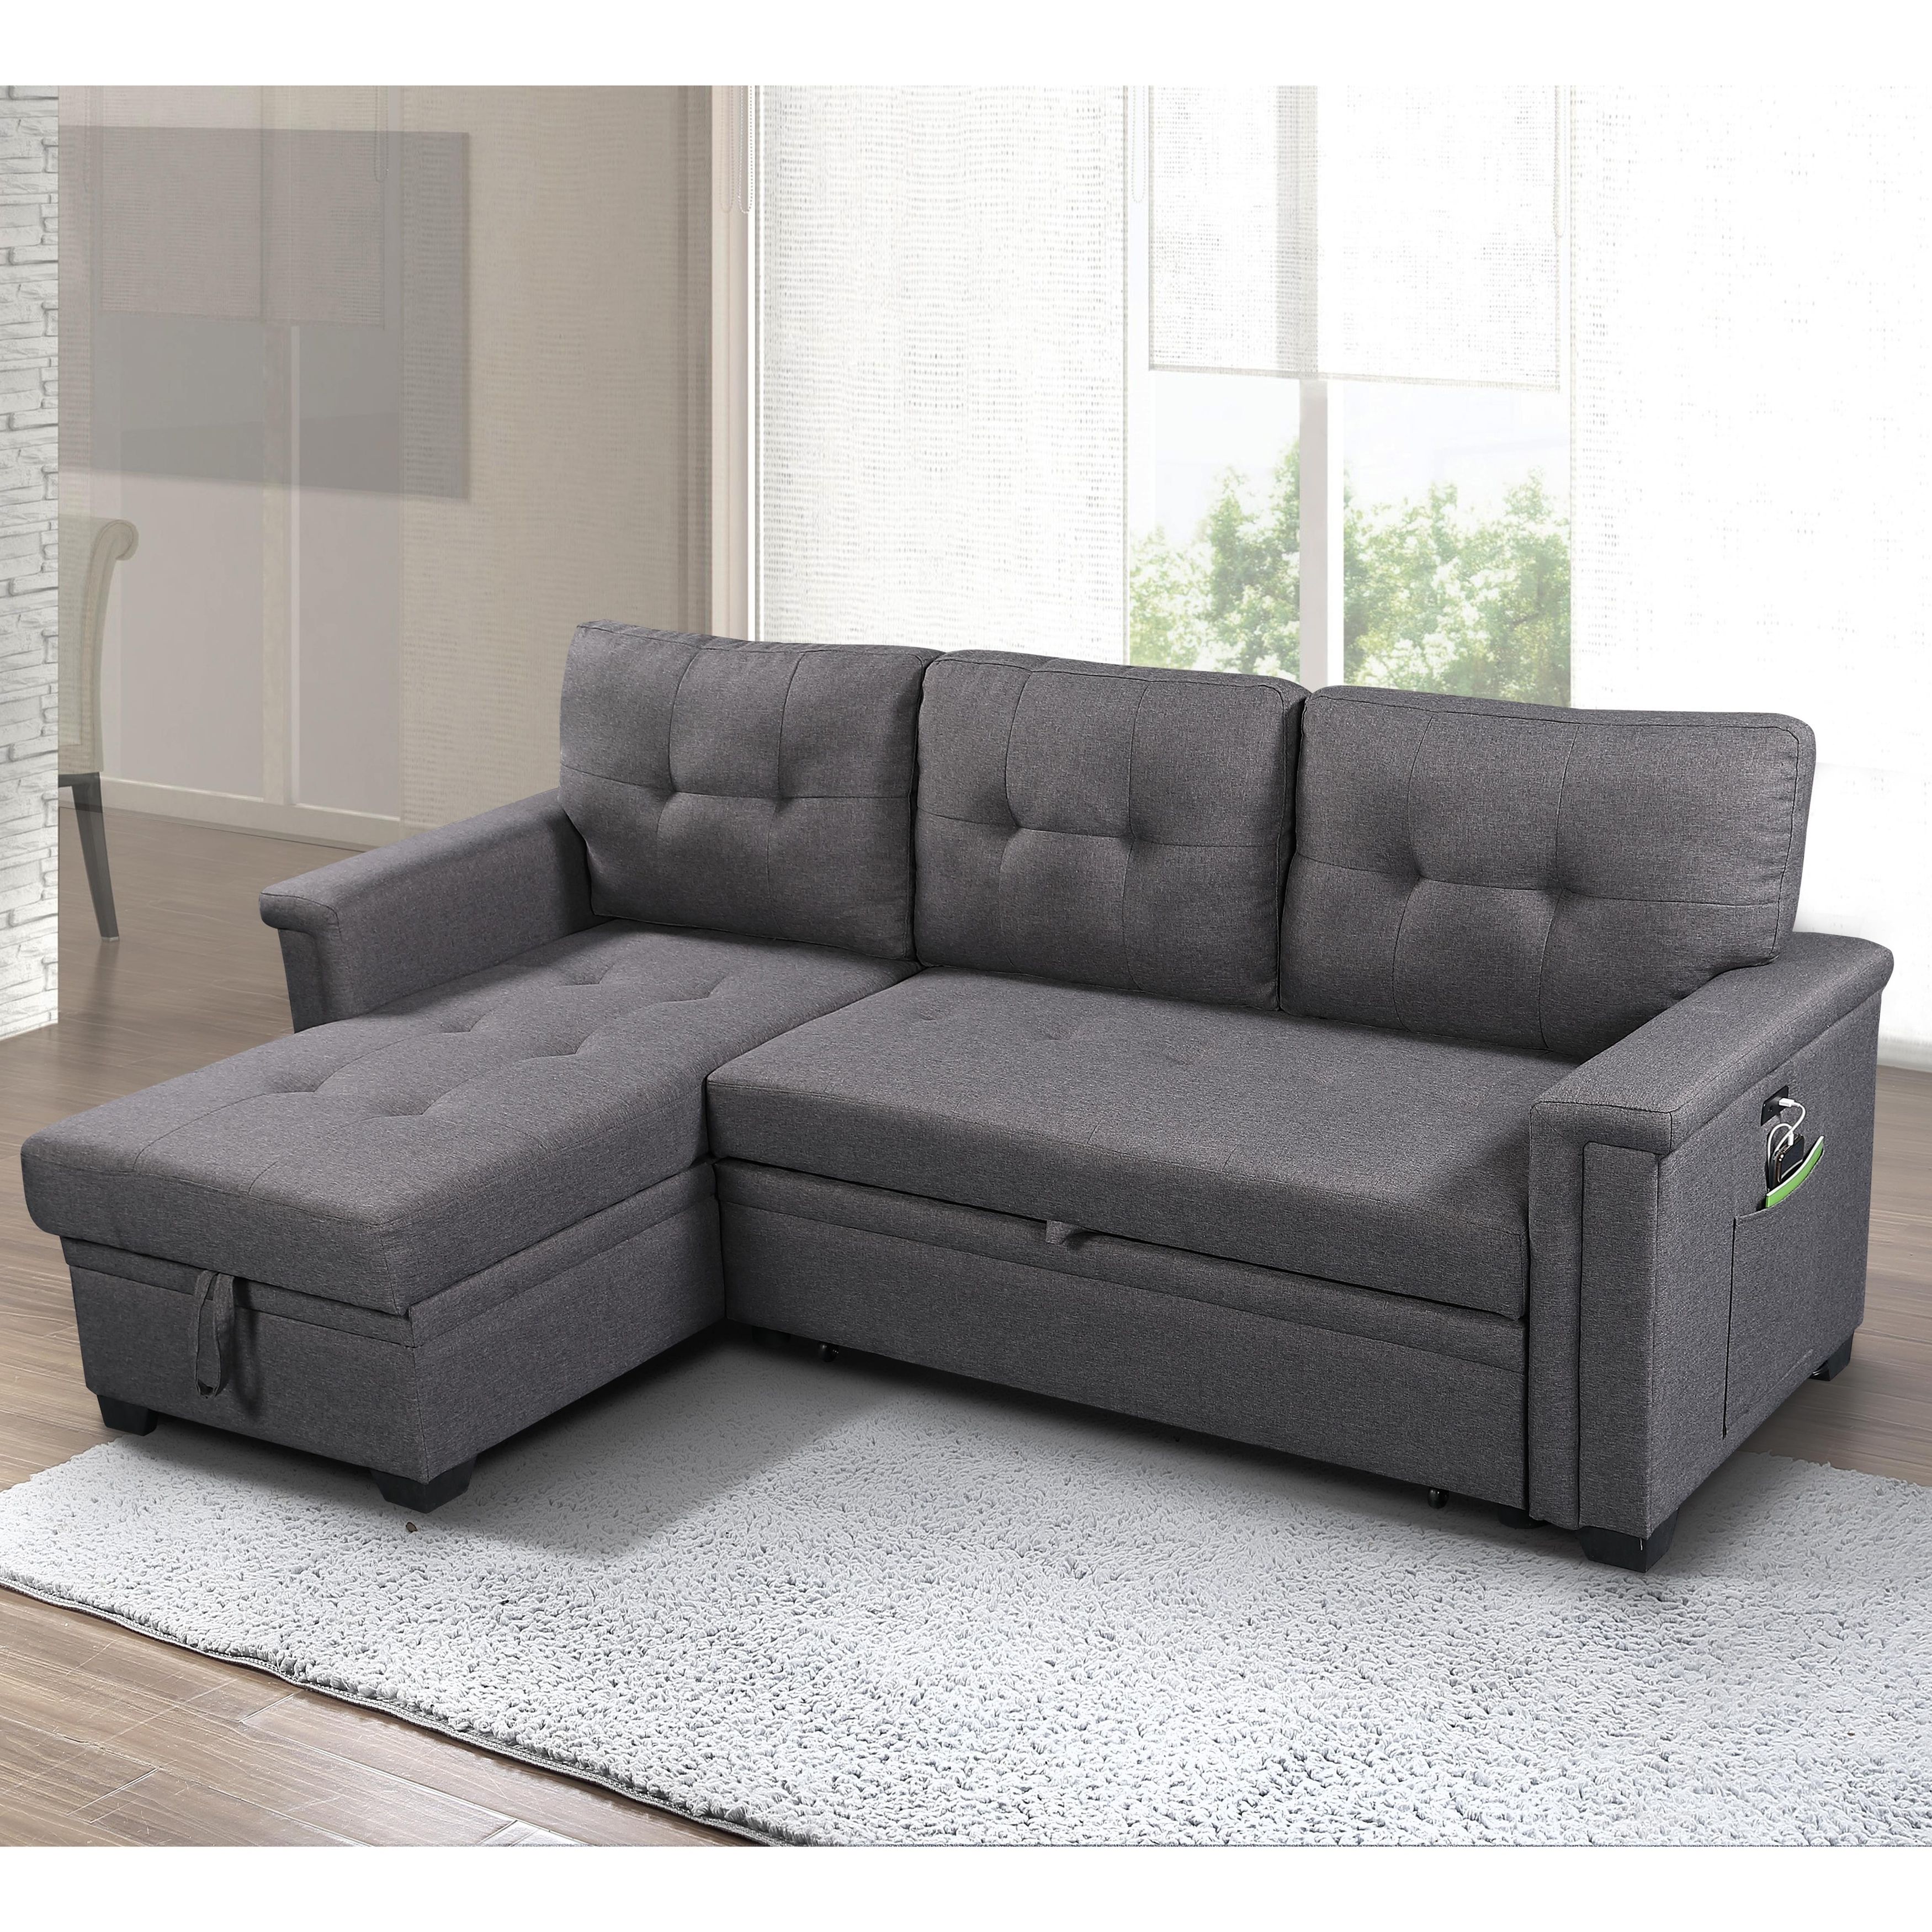 Ashlyn Reversible Sleeper Sofa With Storage Chaise – On Sale – – 30144937 Pertaining To Sleeper Sofas With Storage (Gallery 2 of 20)